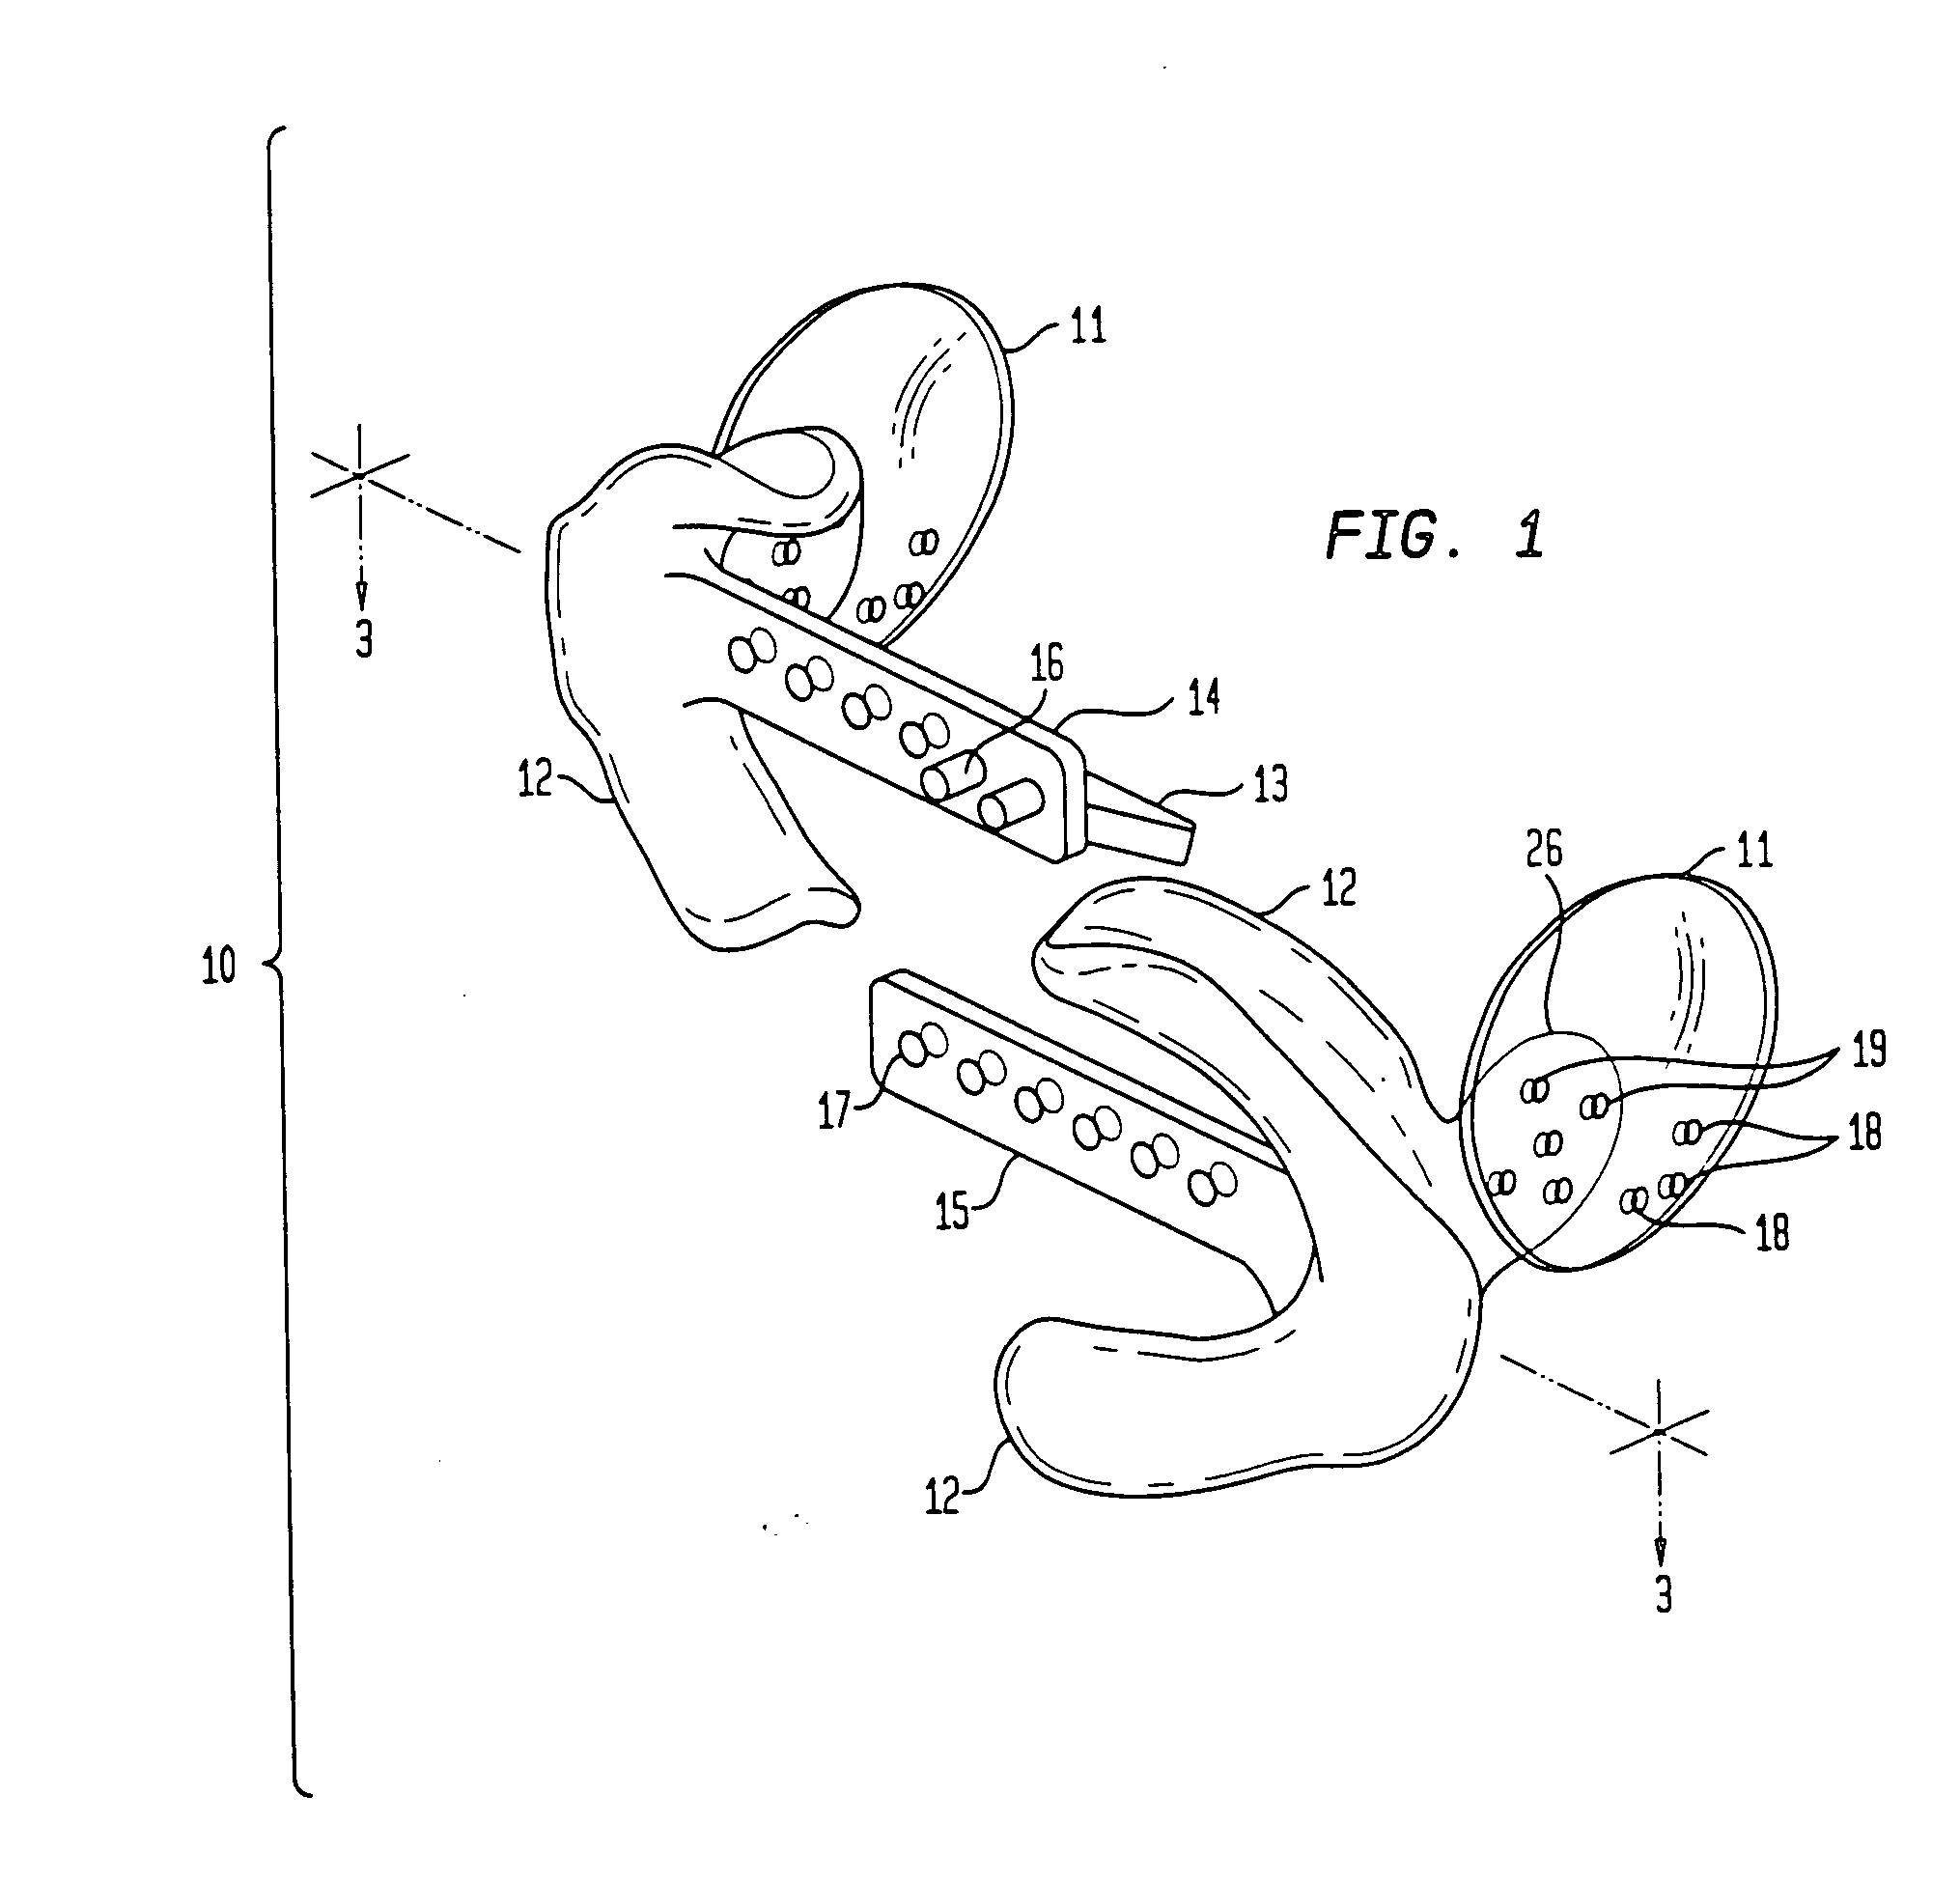 Dental retractor and method of use to produce anatomically accurate jaw models and dental prostheses